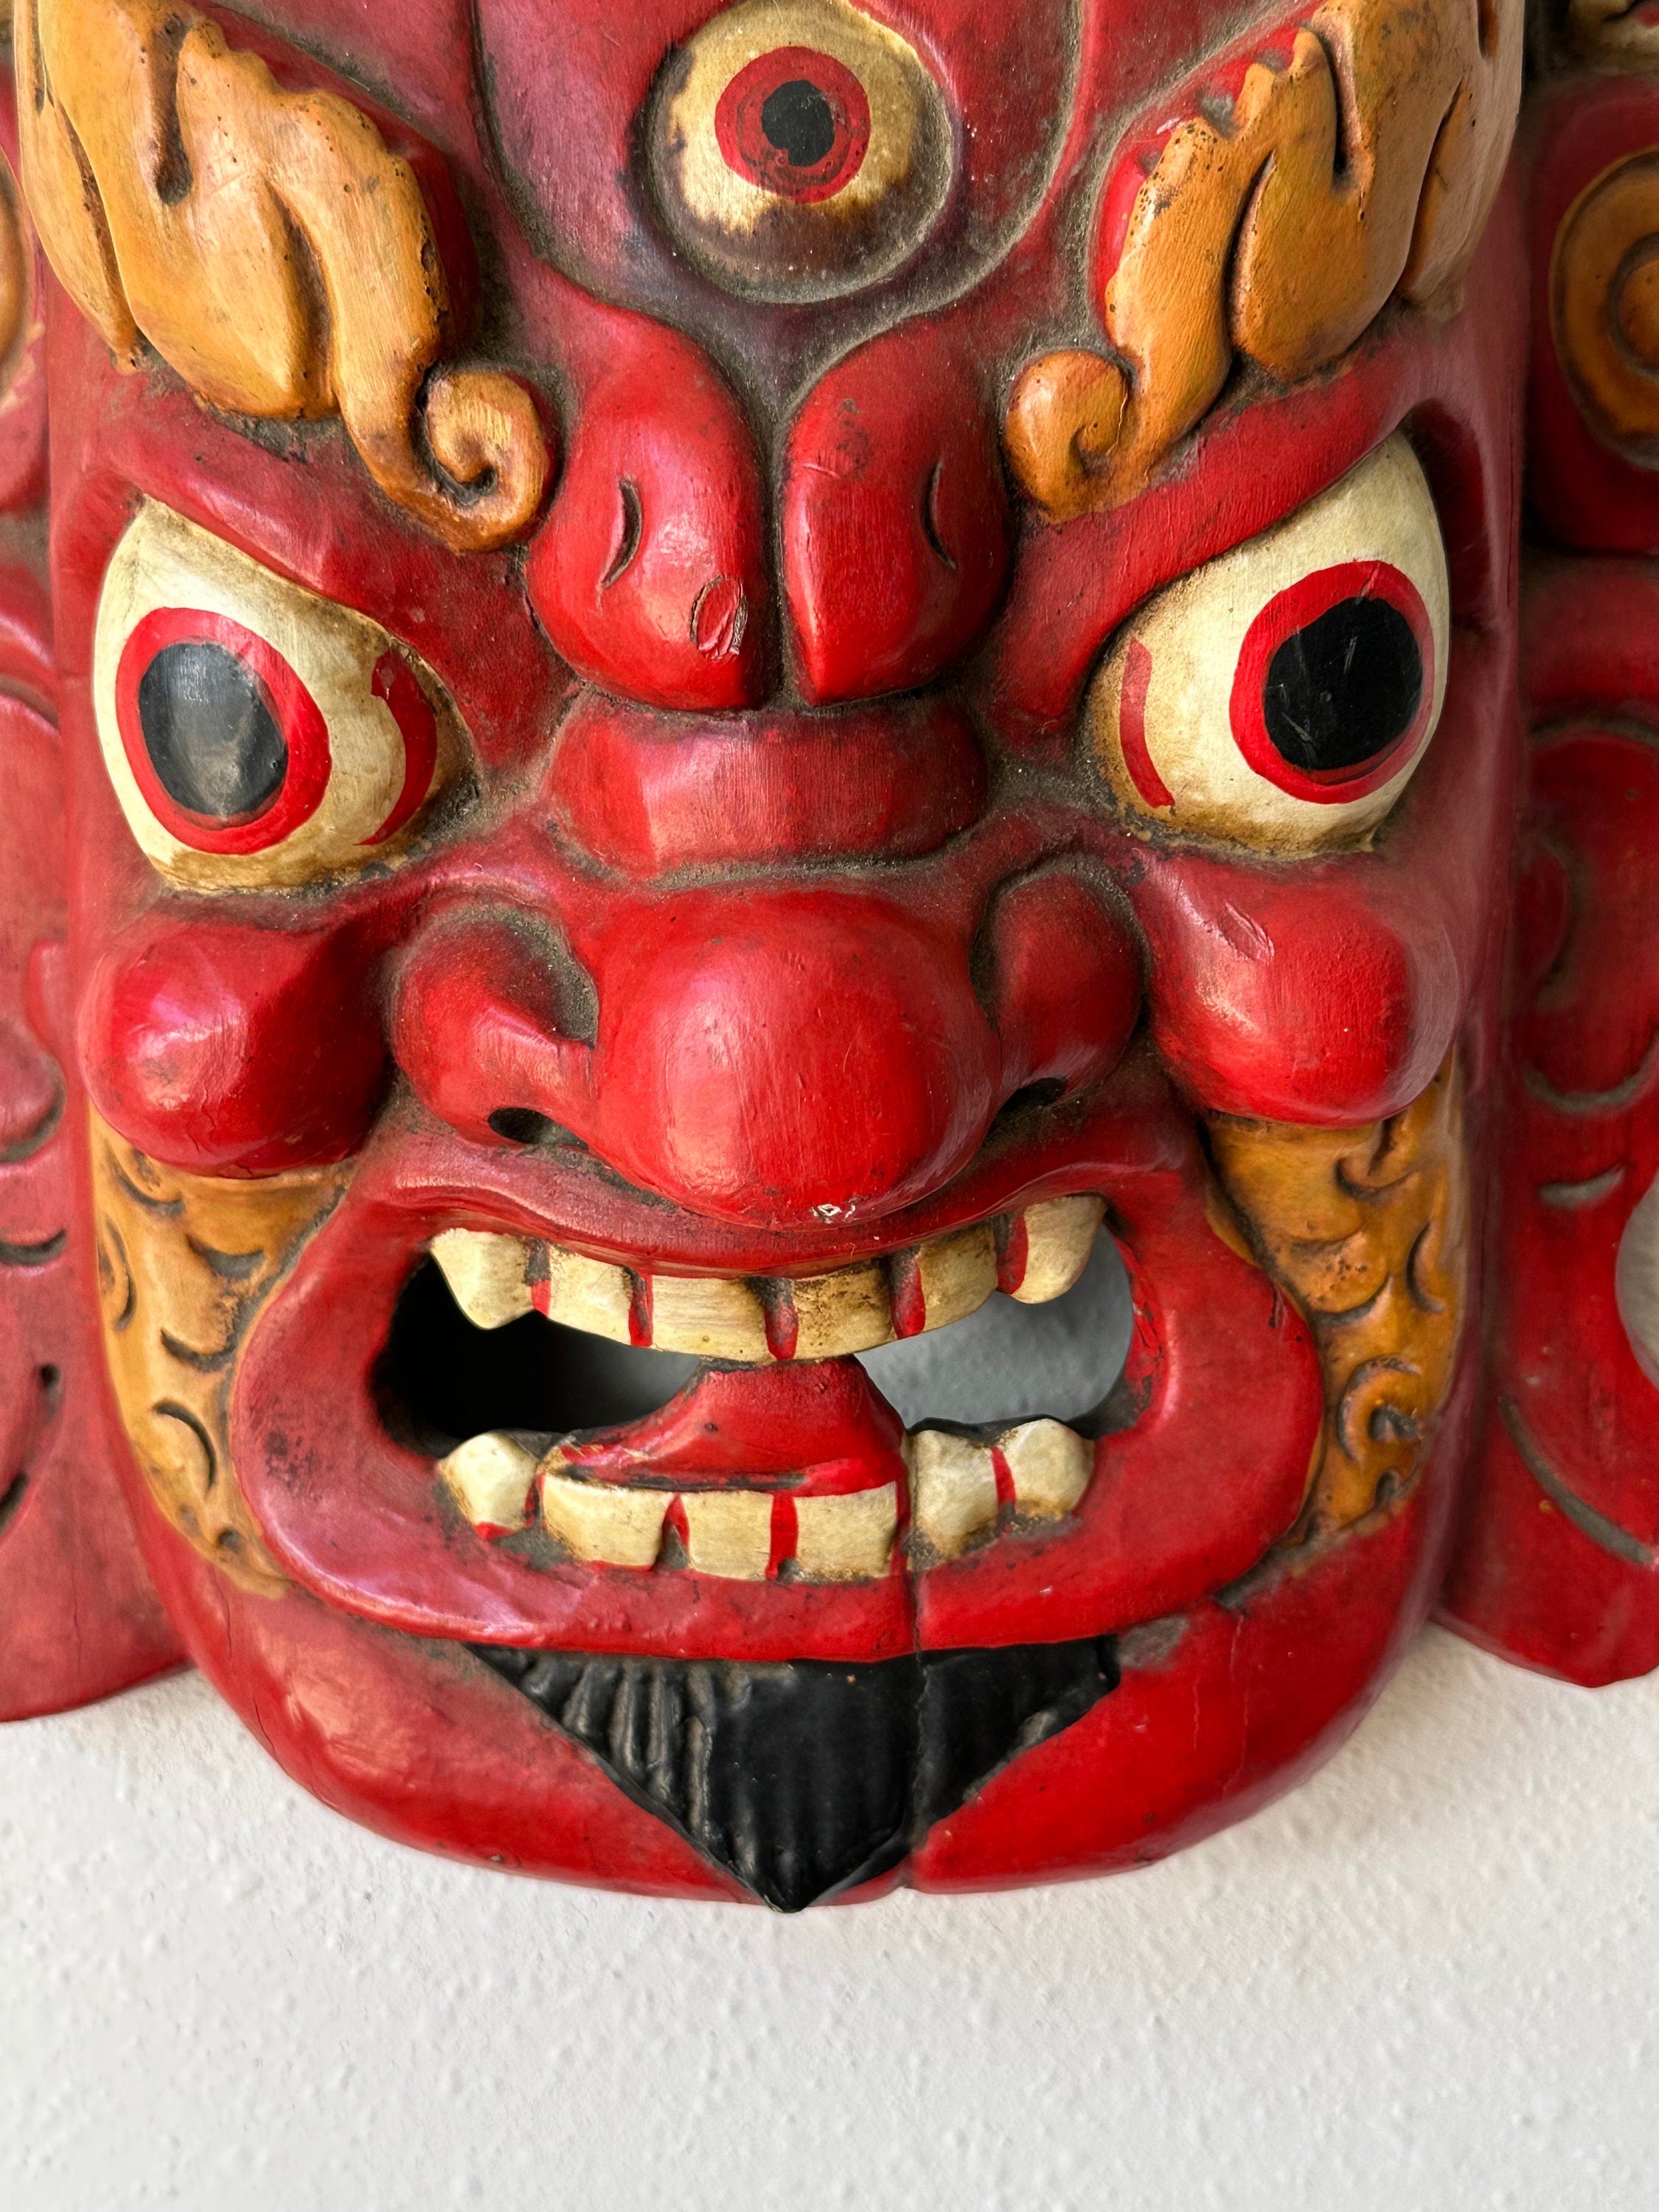 Antique Tibetan Ceremonial Wooden Mask | 3D Hand Carved Wood Sculpture Hanging Wall Decor | Chinese Art Eclectic Asian Style Home Decor